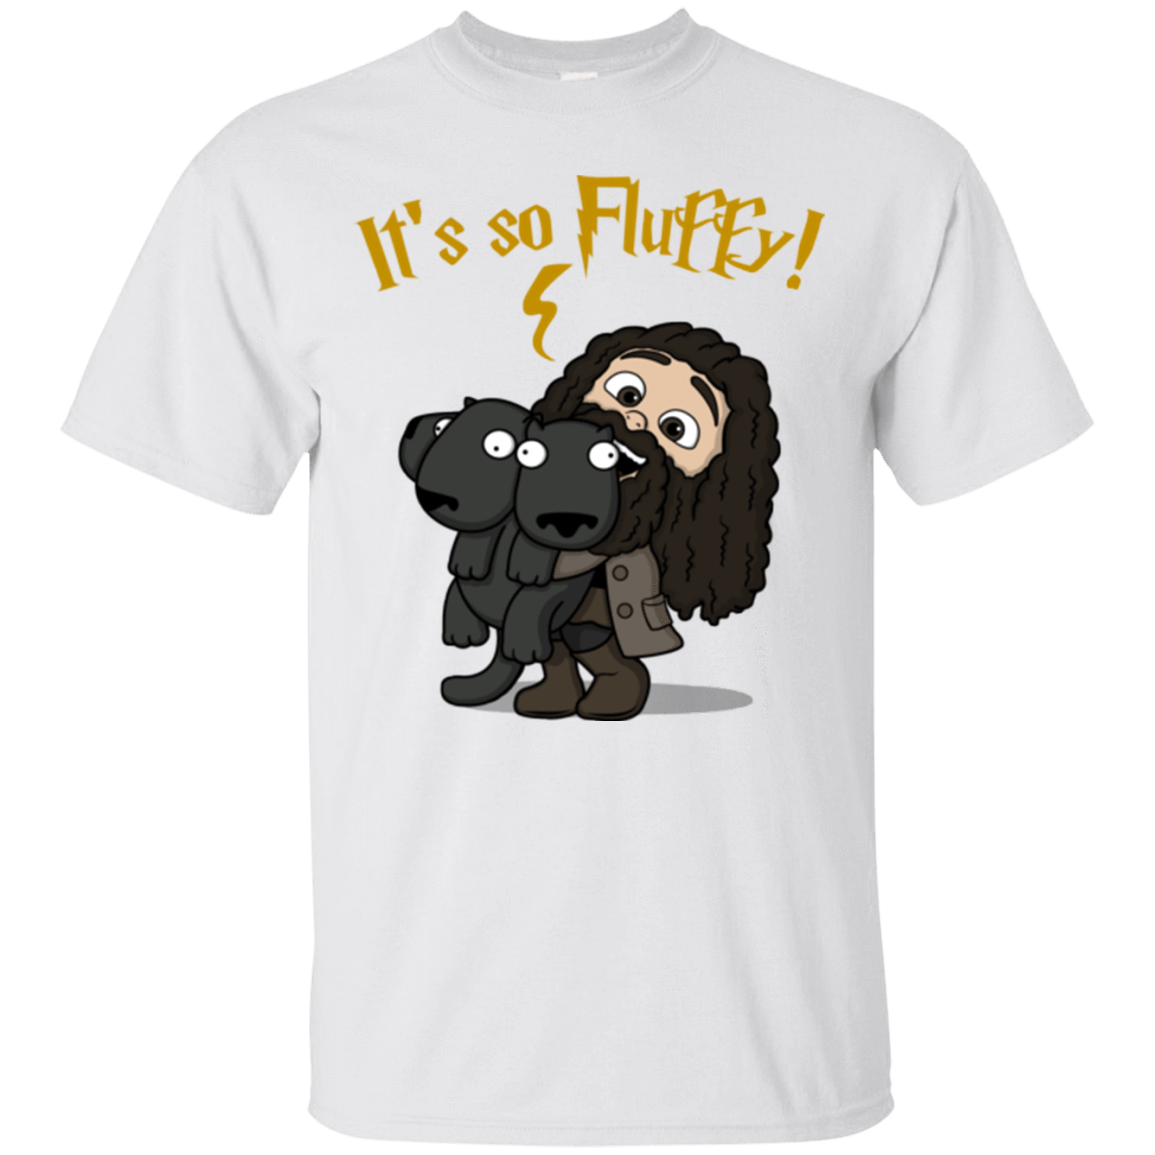 T-Shirts White / Small Its So Fluffy T-Shirt